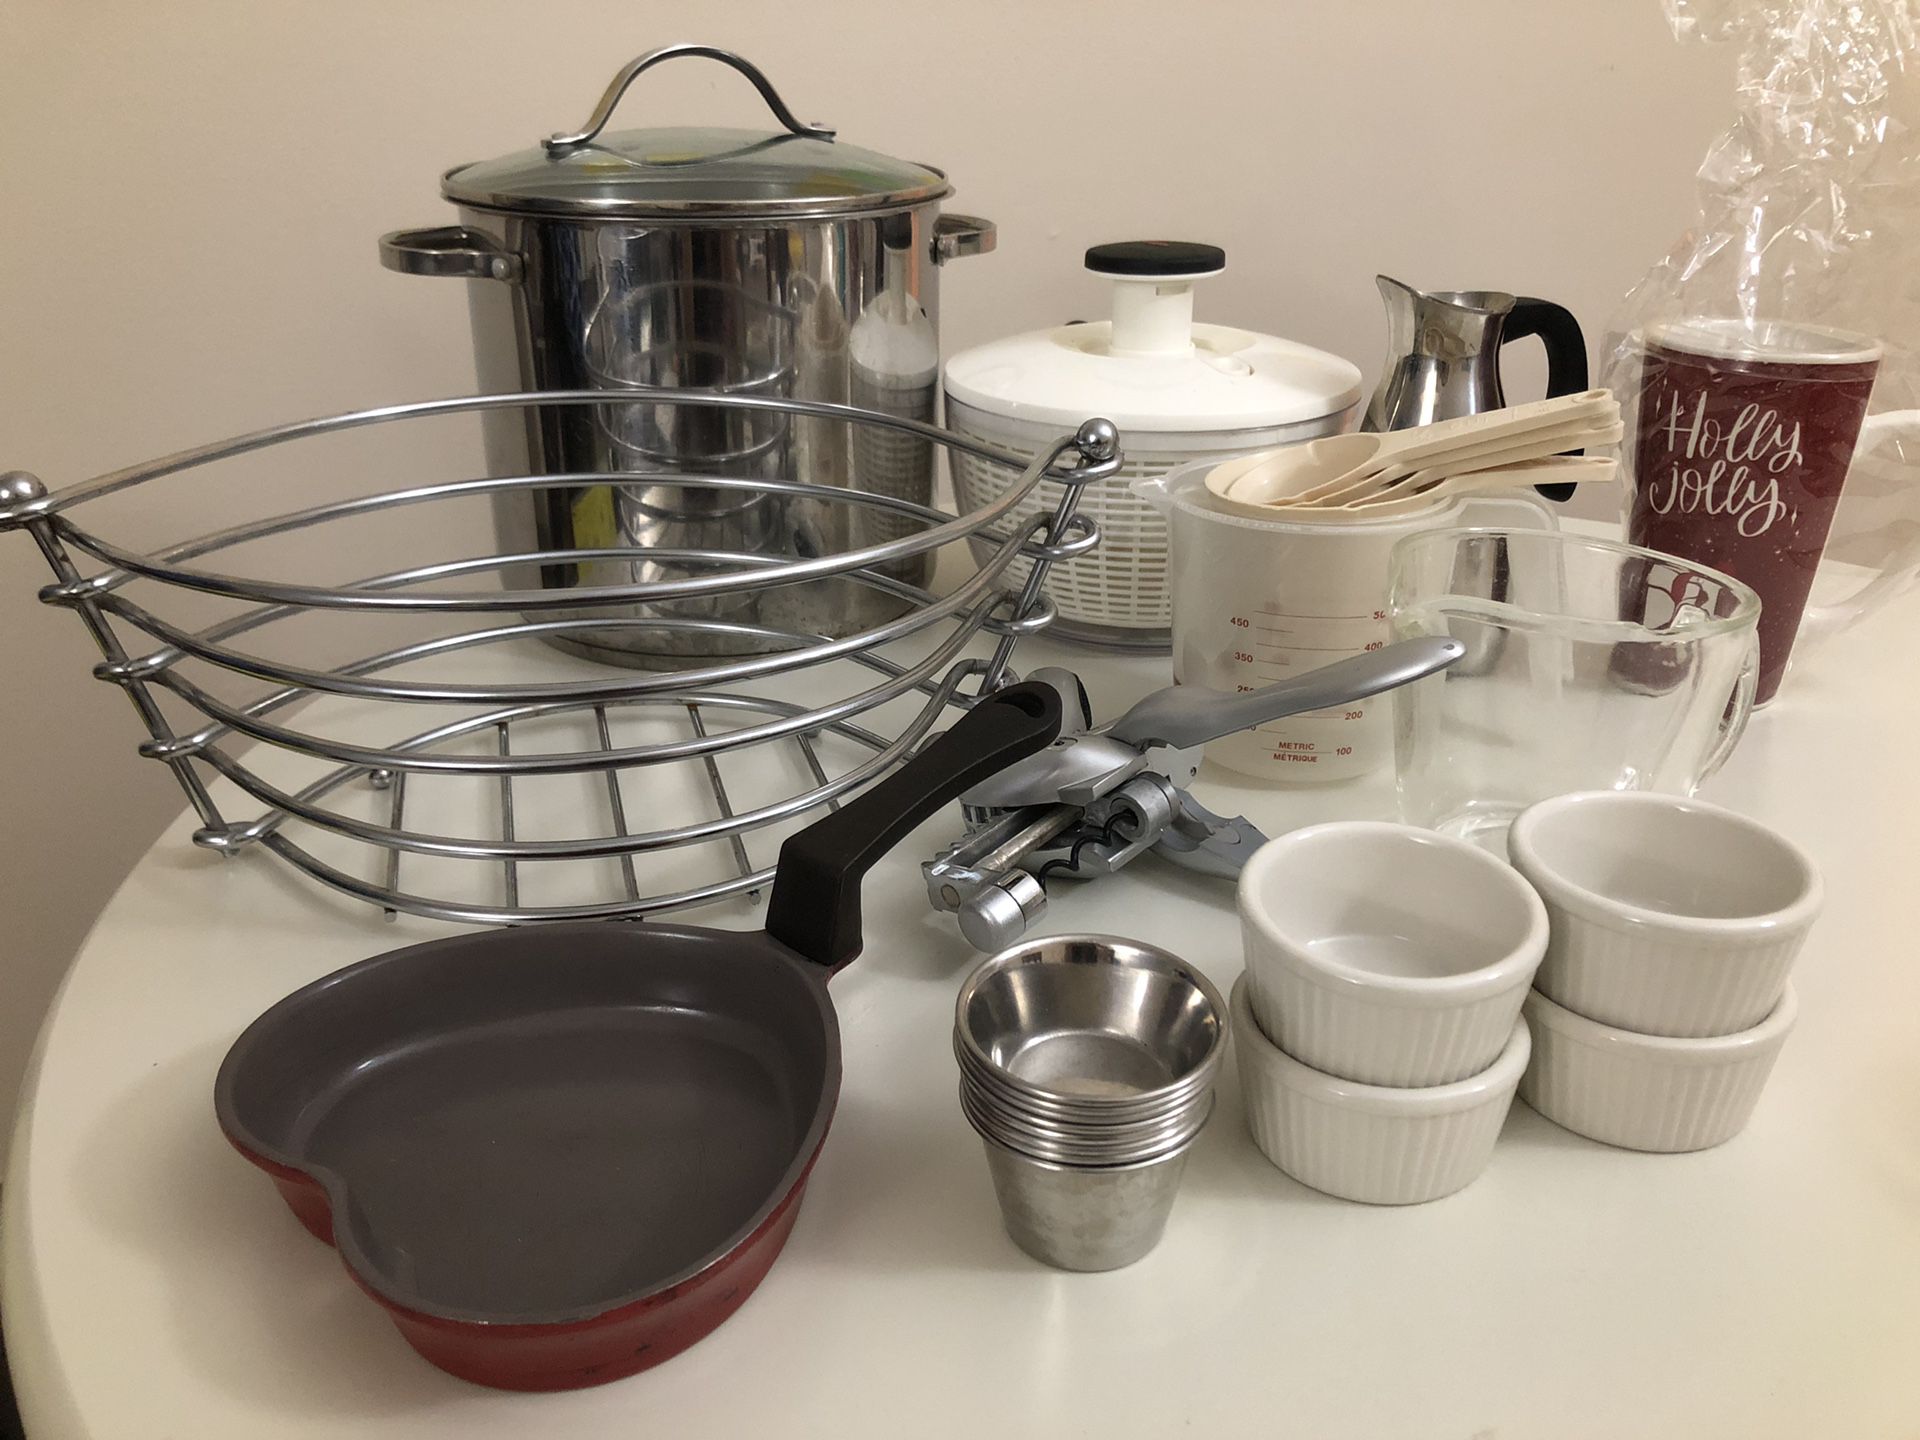 Pots, pans, mugs, salad spinner, measuring cups, bowls, plates, spatula - kitchen tools for cooking